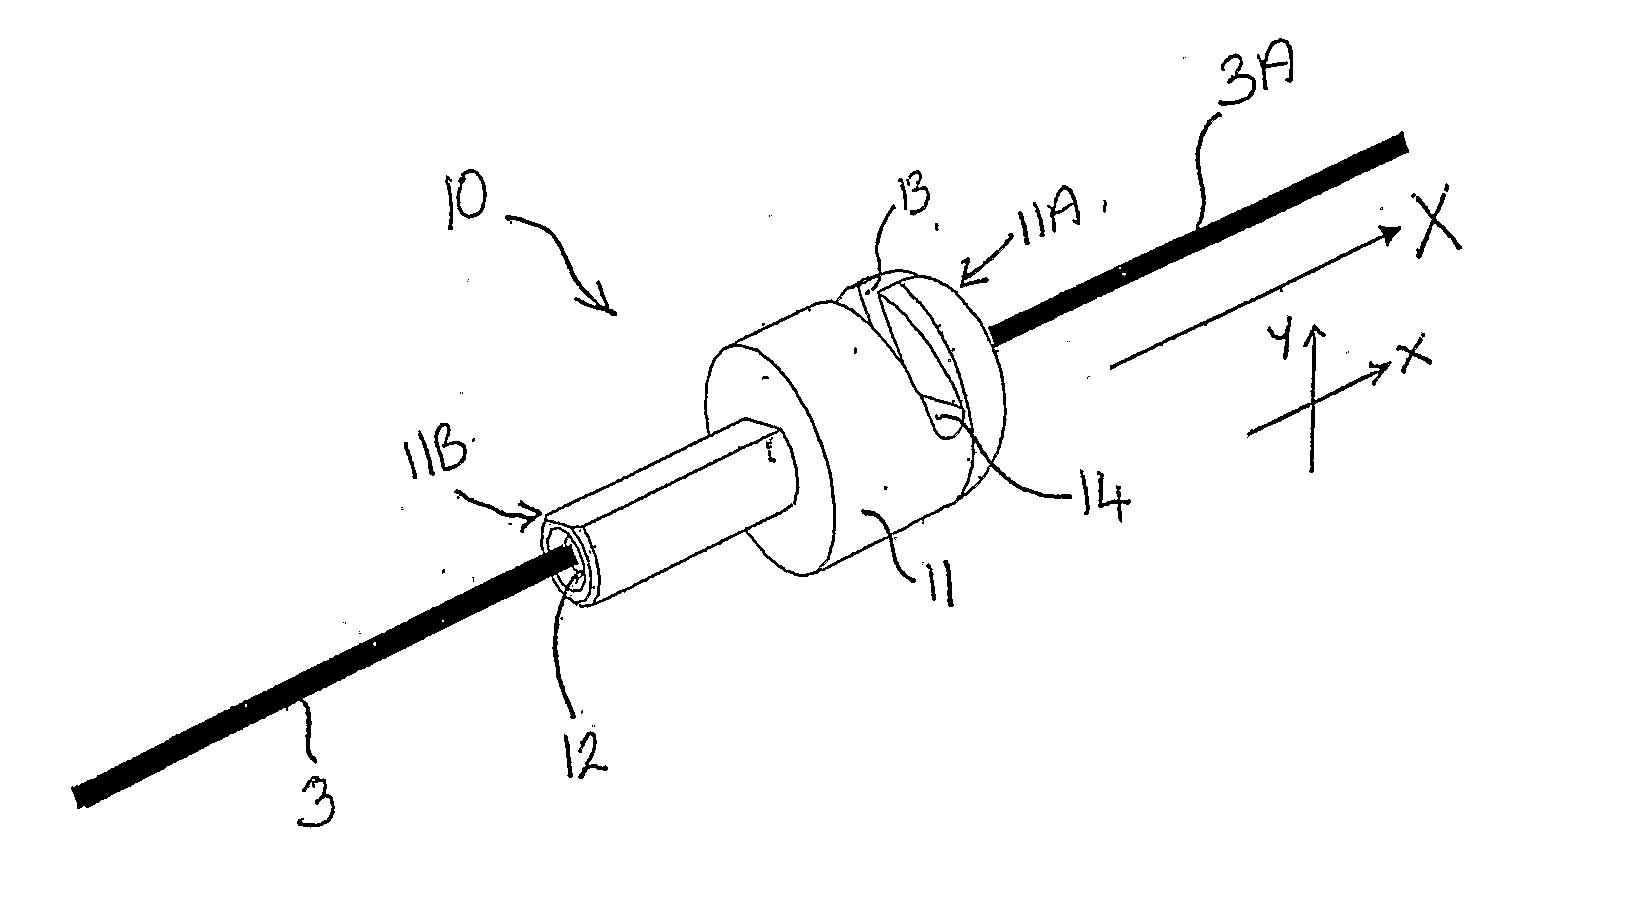 Wire Retainer for Surgical Device